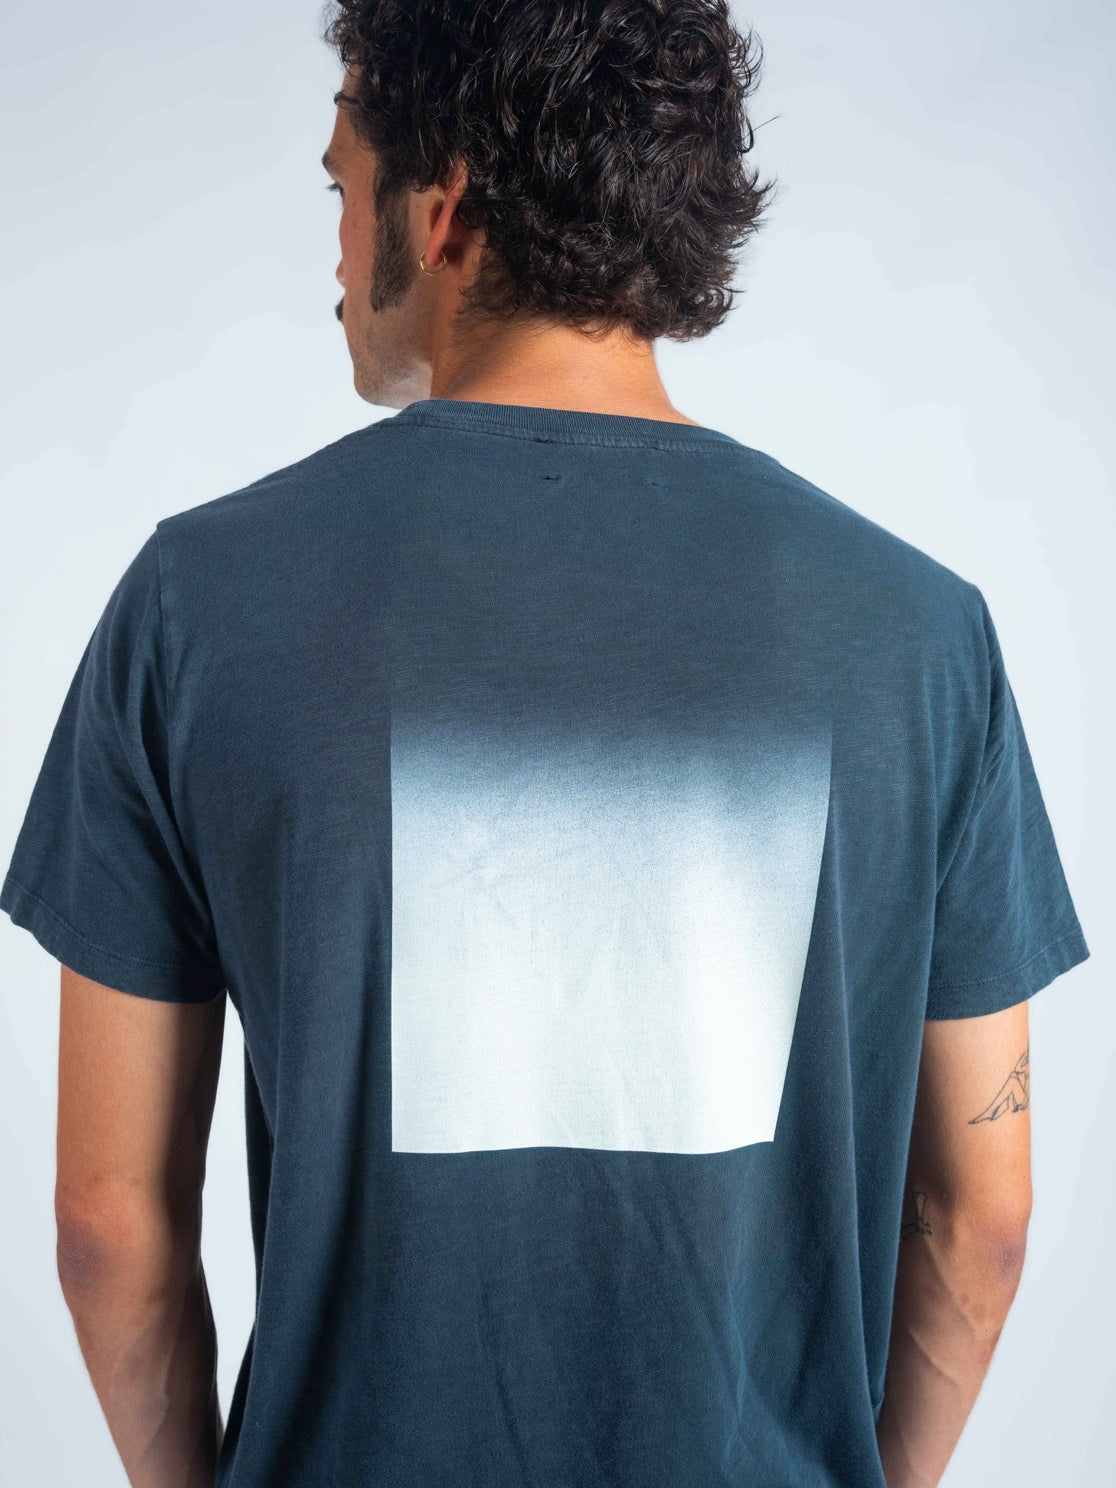 T-SHIRT GRAPHIC GRADIENT CHARCOAL & OFF-WHITE